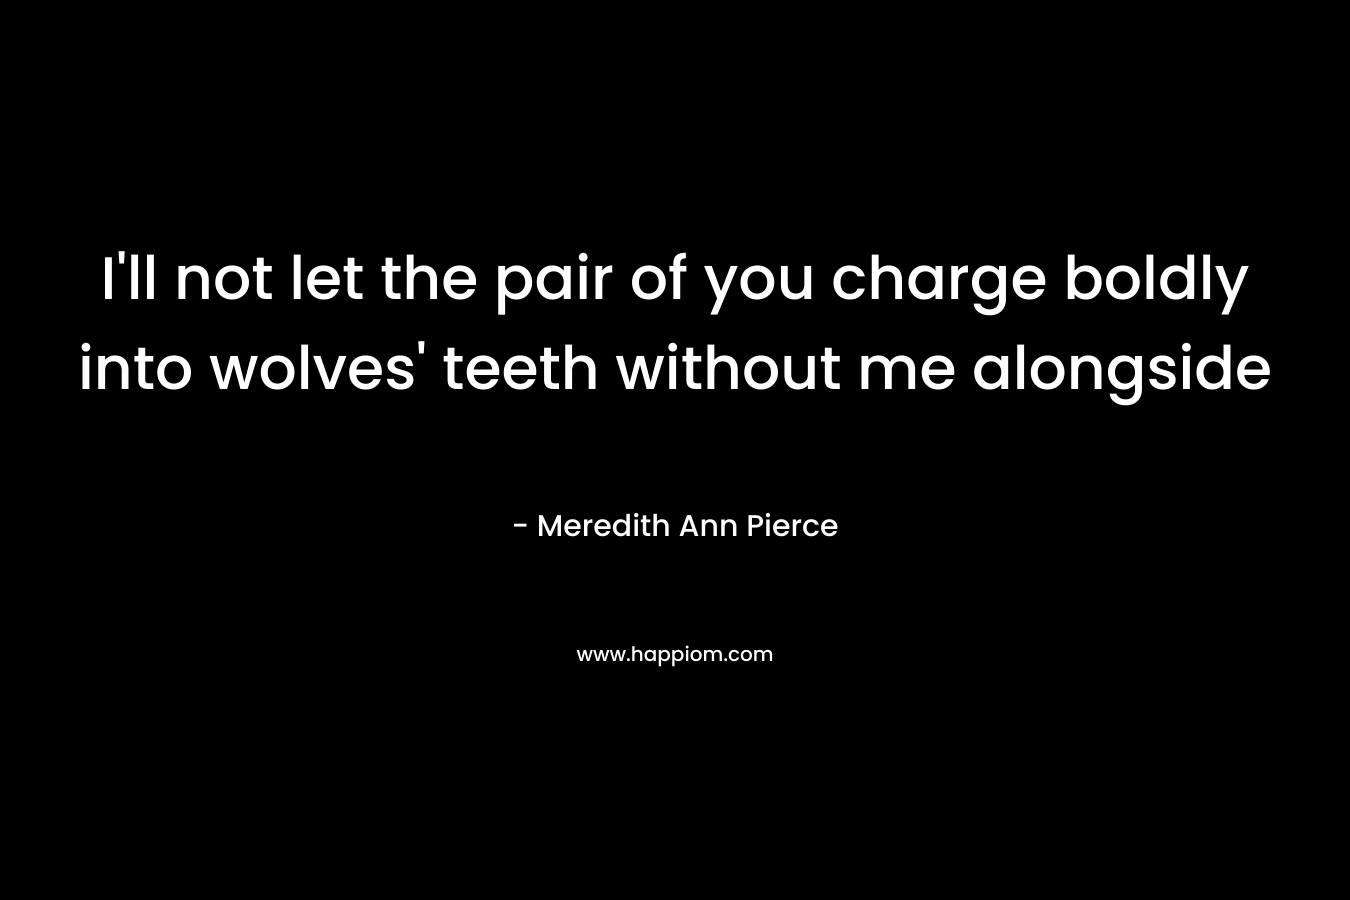 I'll not let the pair of you charge boldly into wolves' teeth without me alongside